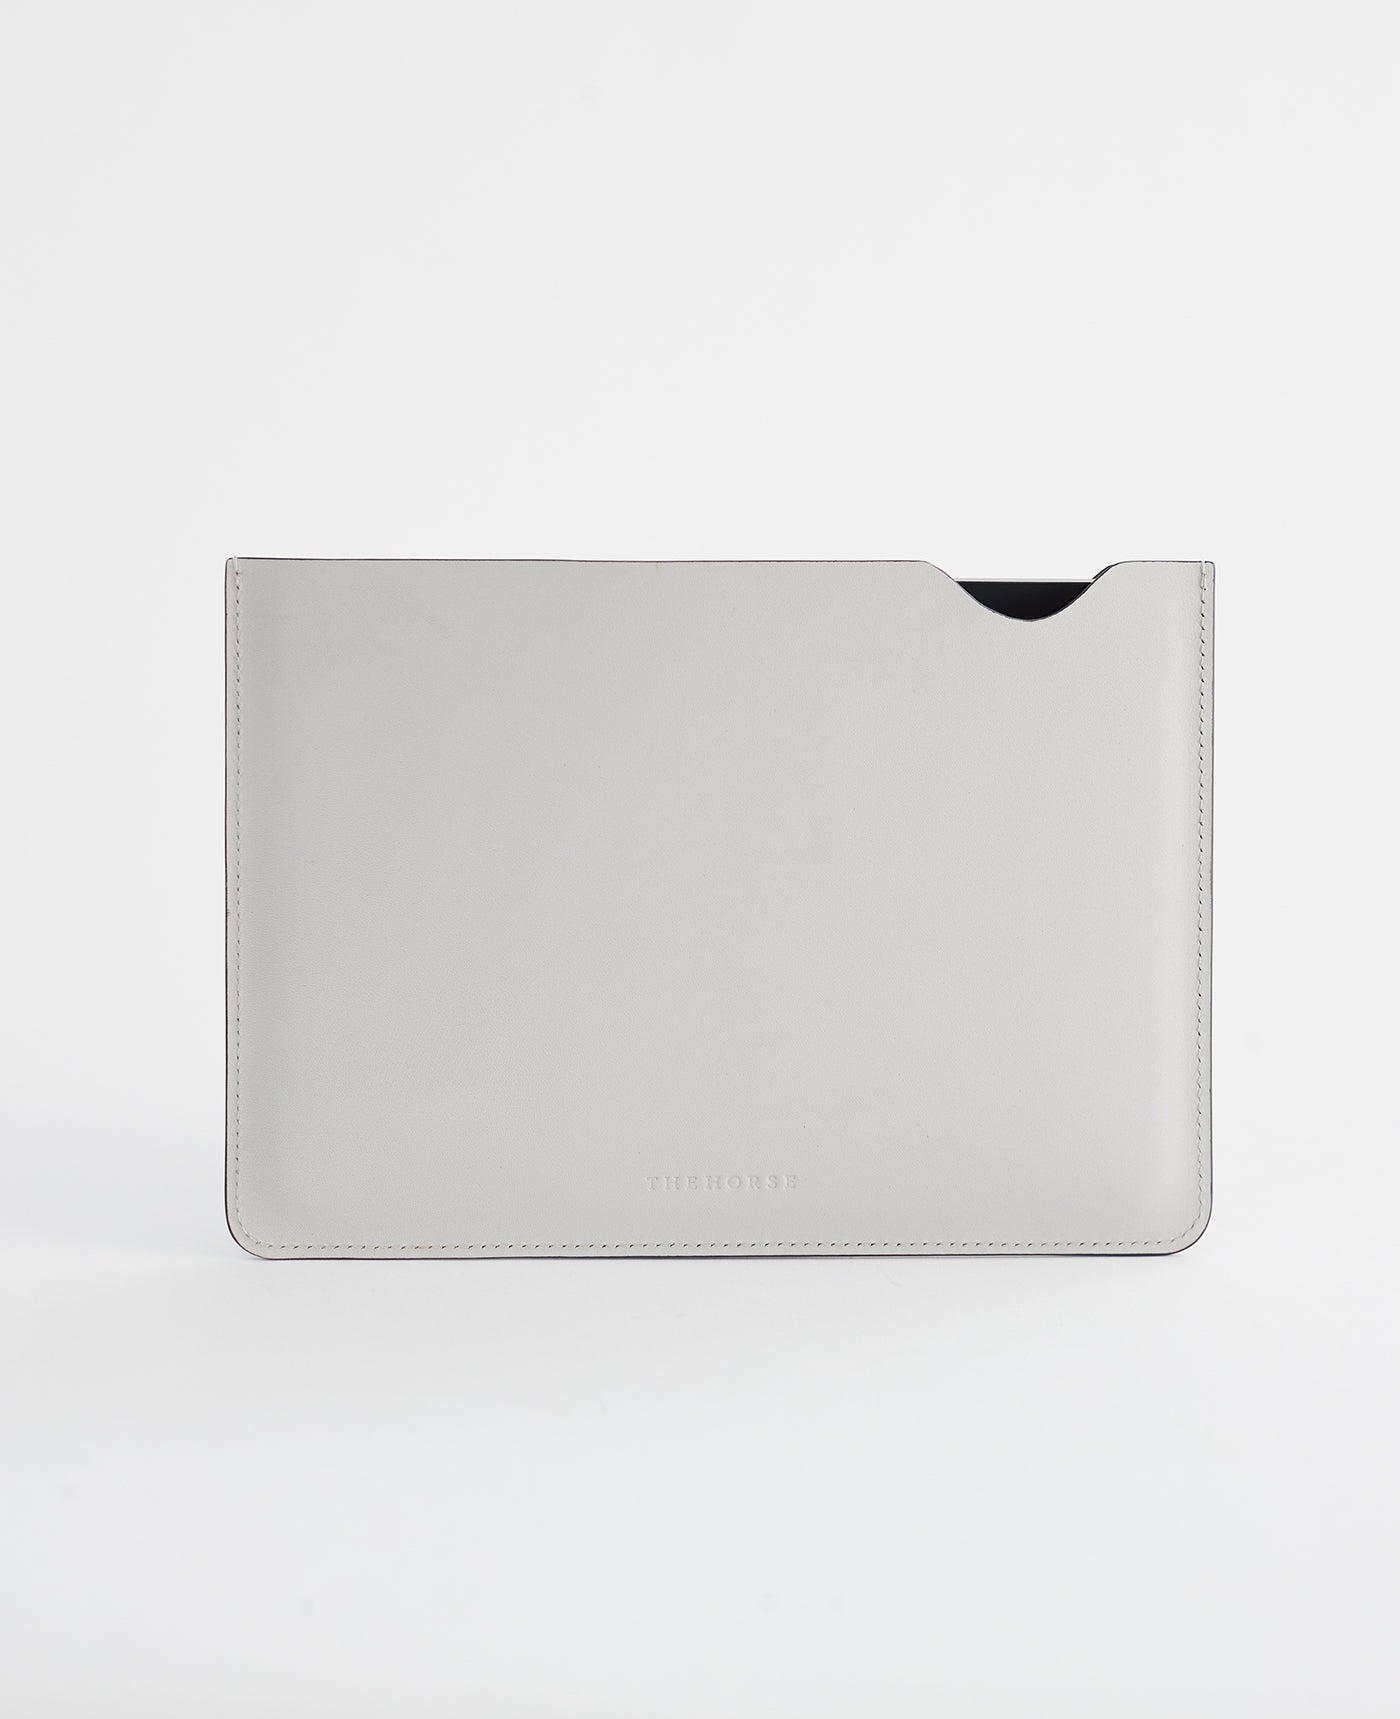 iPad Mini Leather Sleeve in Surf Mist by The Horse®